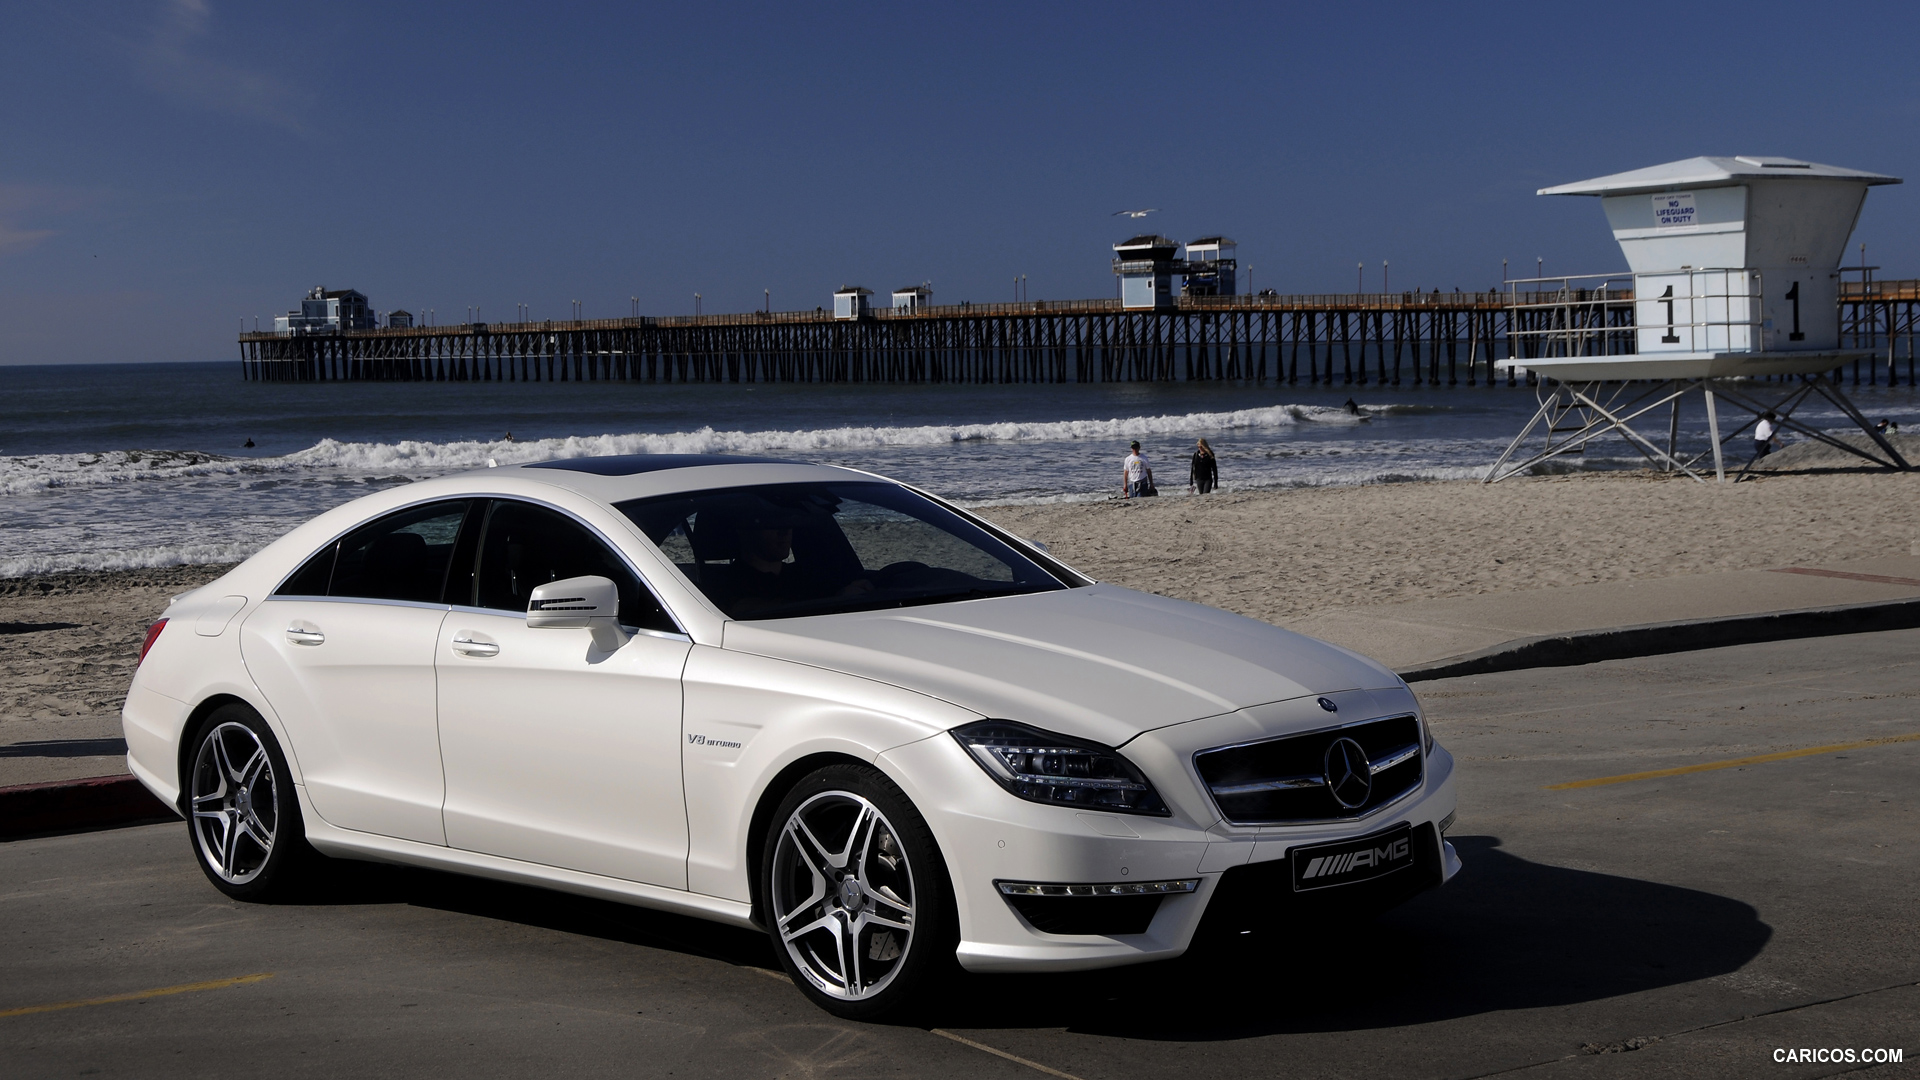 Mercedes-Benz CLS63 AMG (2012) US-Version - Diamond White - Side, #17 of 100